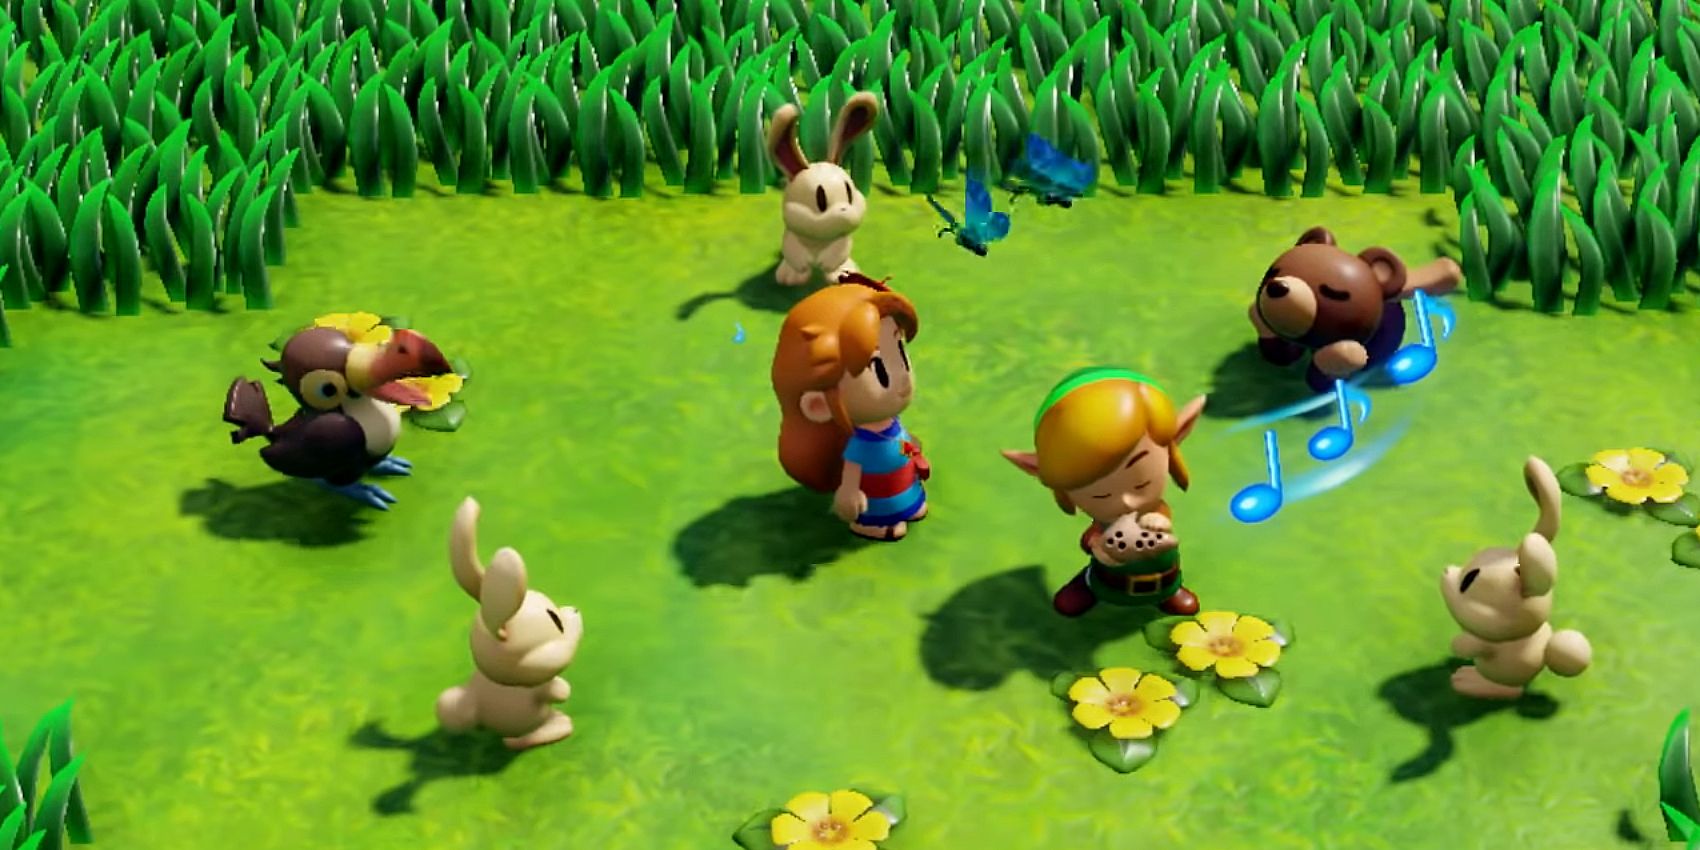 Link with Marin in The Legend Of Zelda: Link's Awakening, playing his occarina as animals gather round